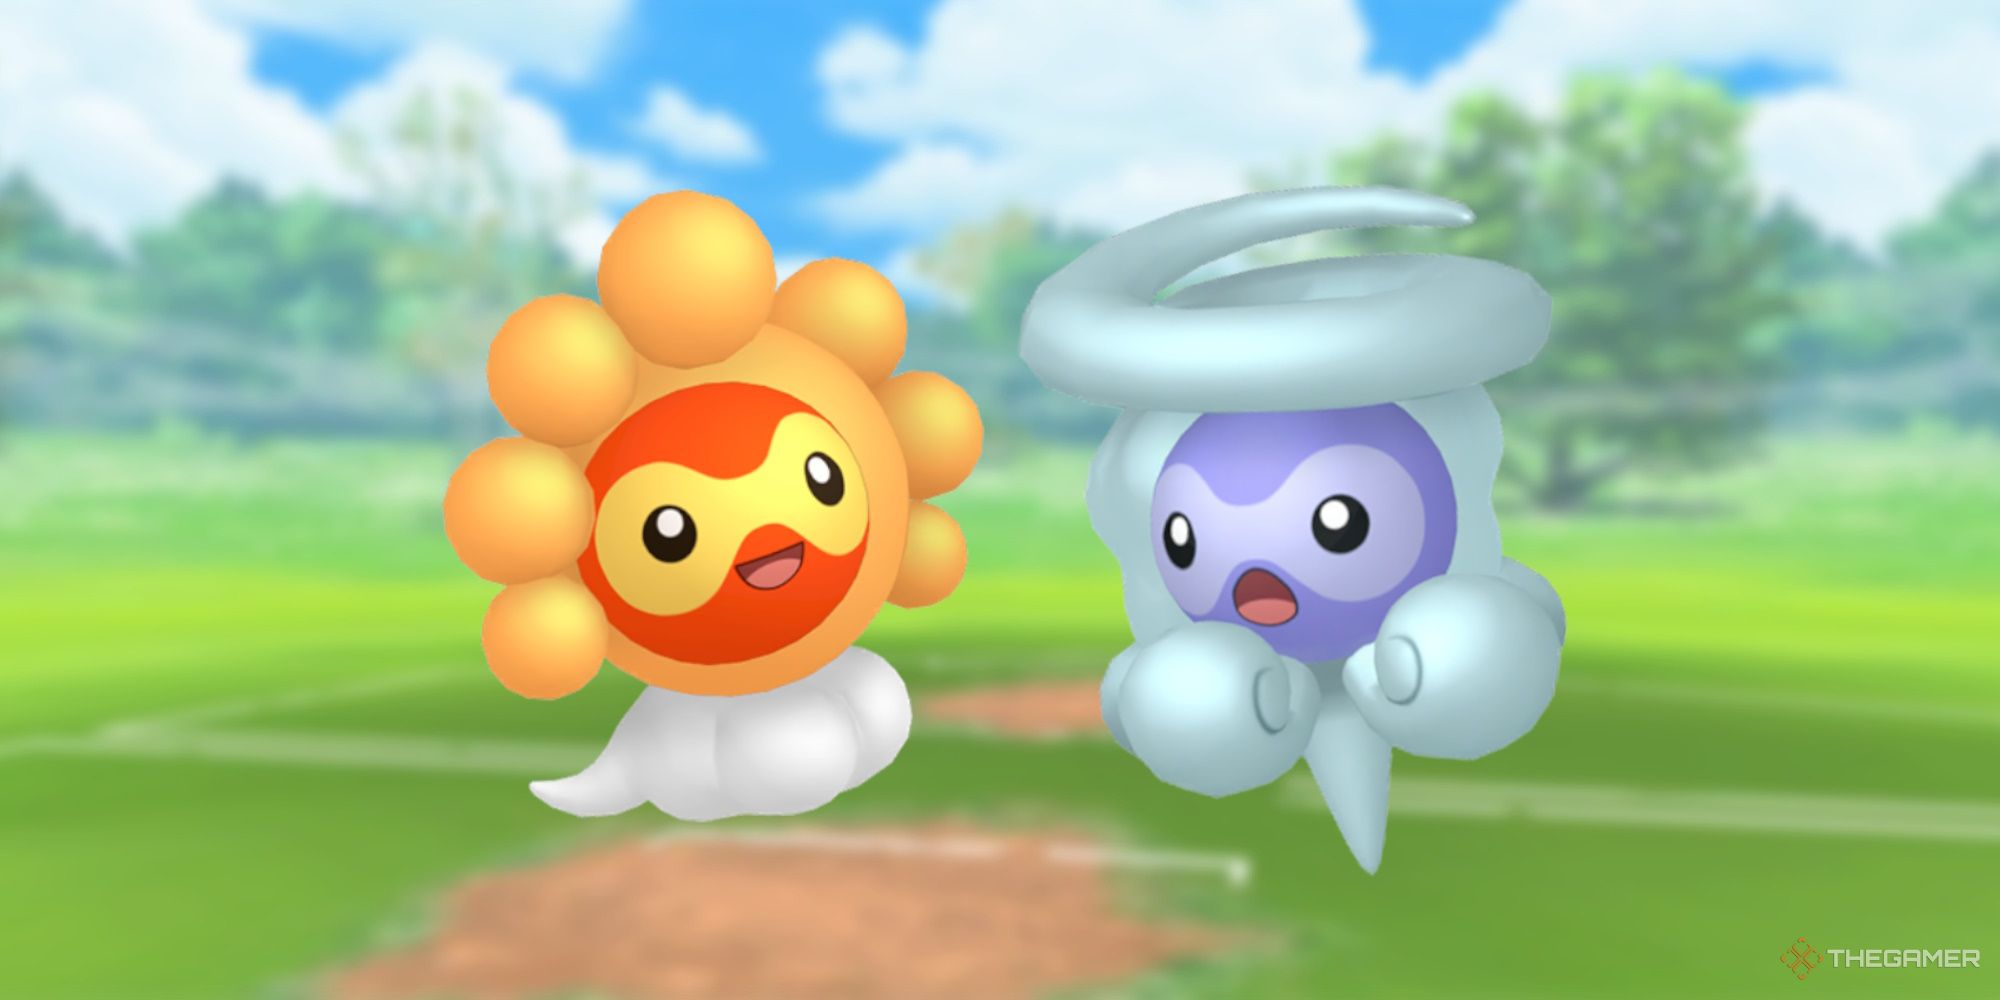 Image of Sunny Form Castform and Snowy Form Castform with the Pokemon Go battlefield as the background